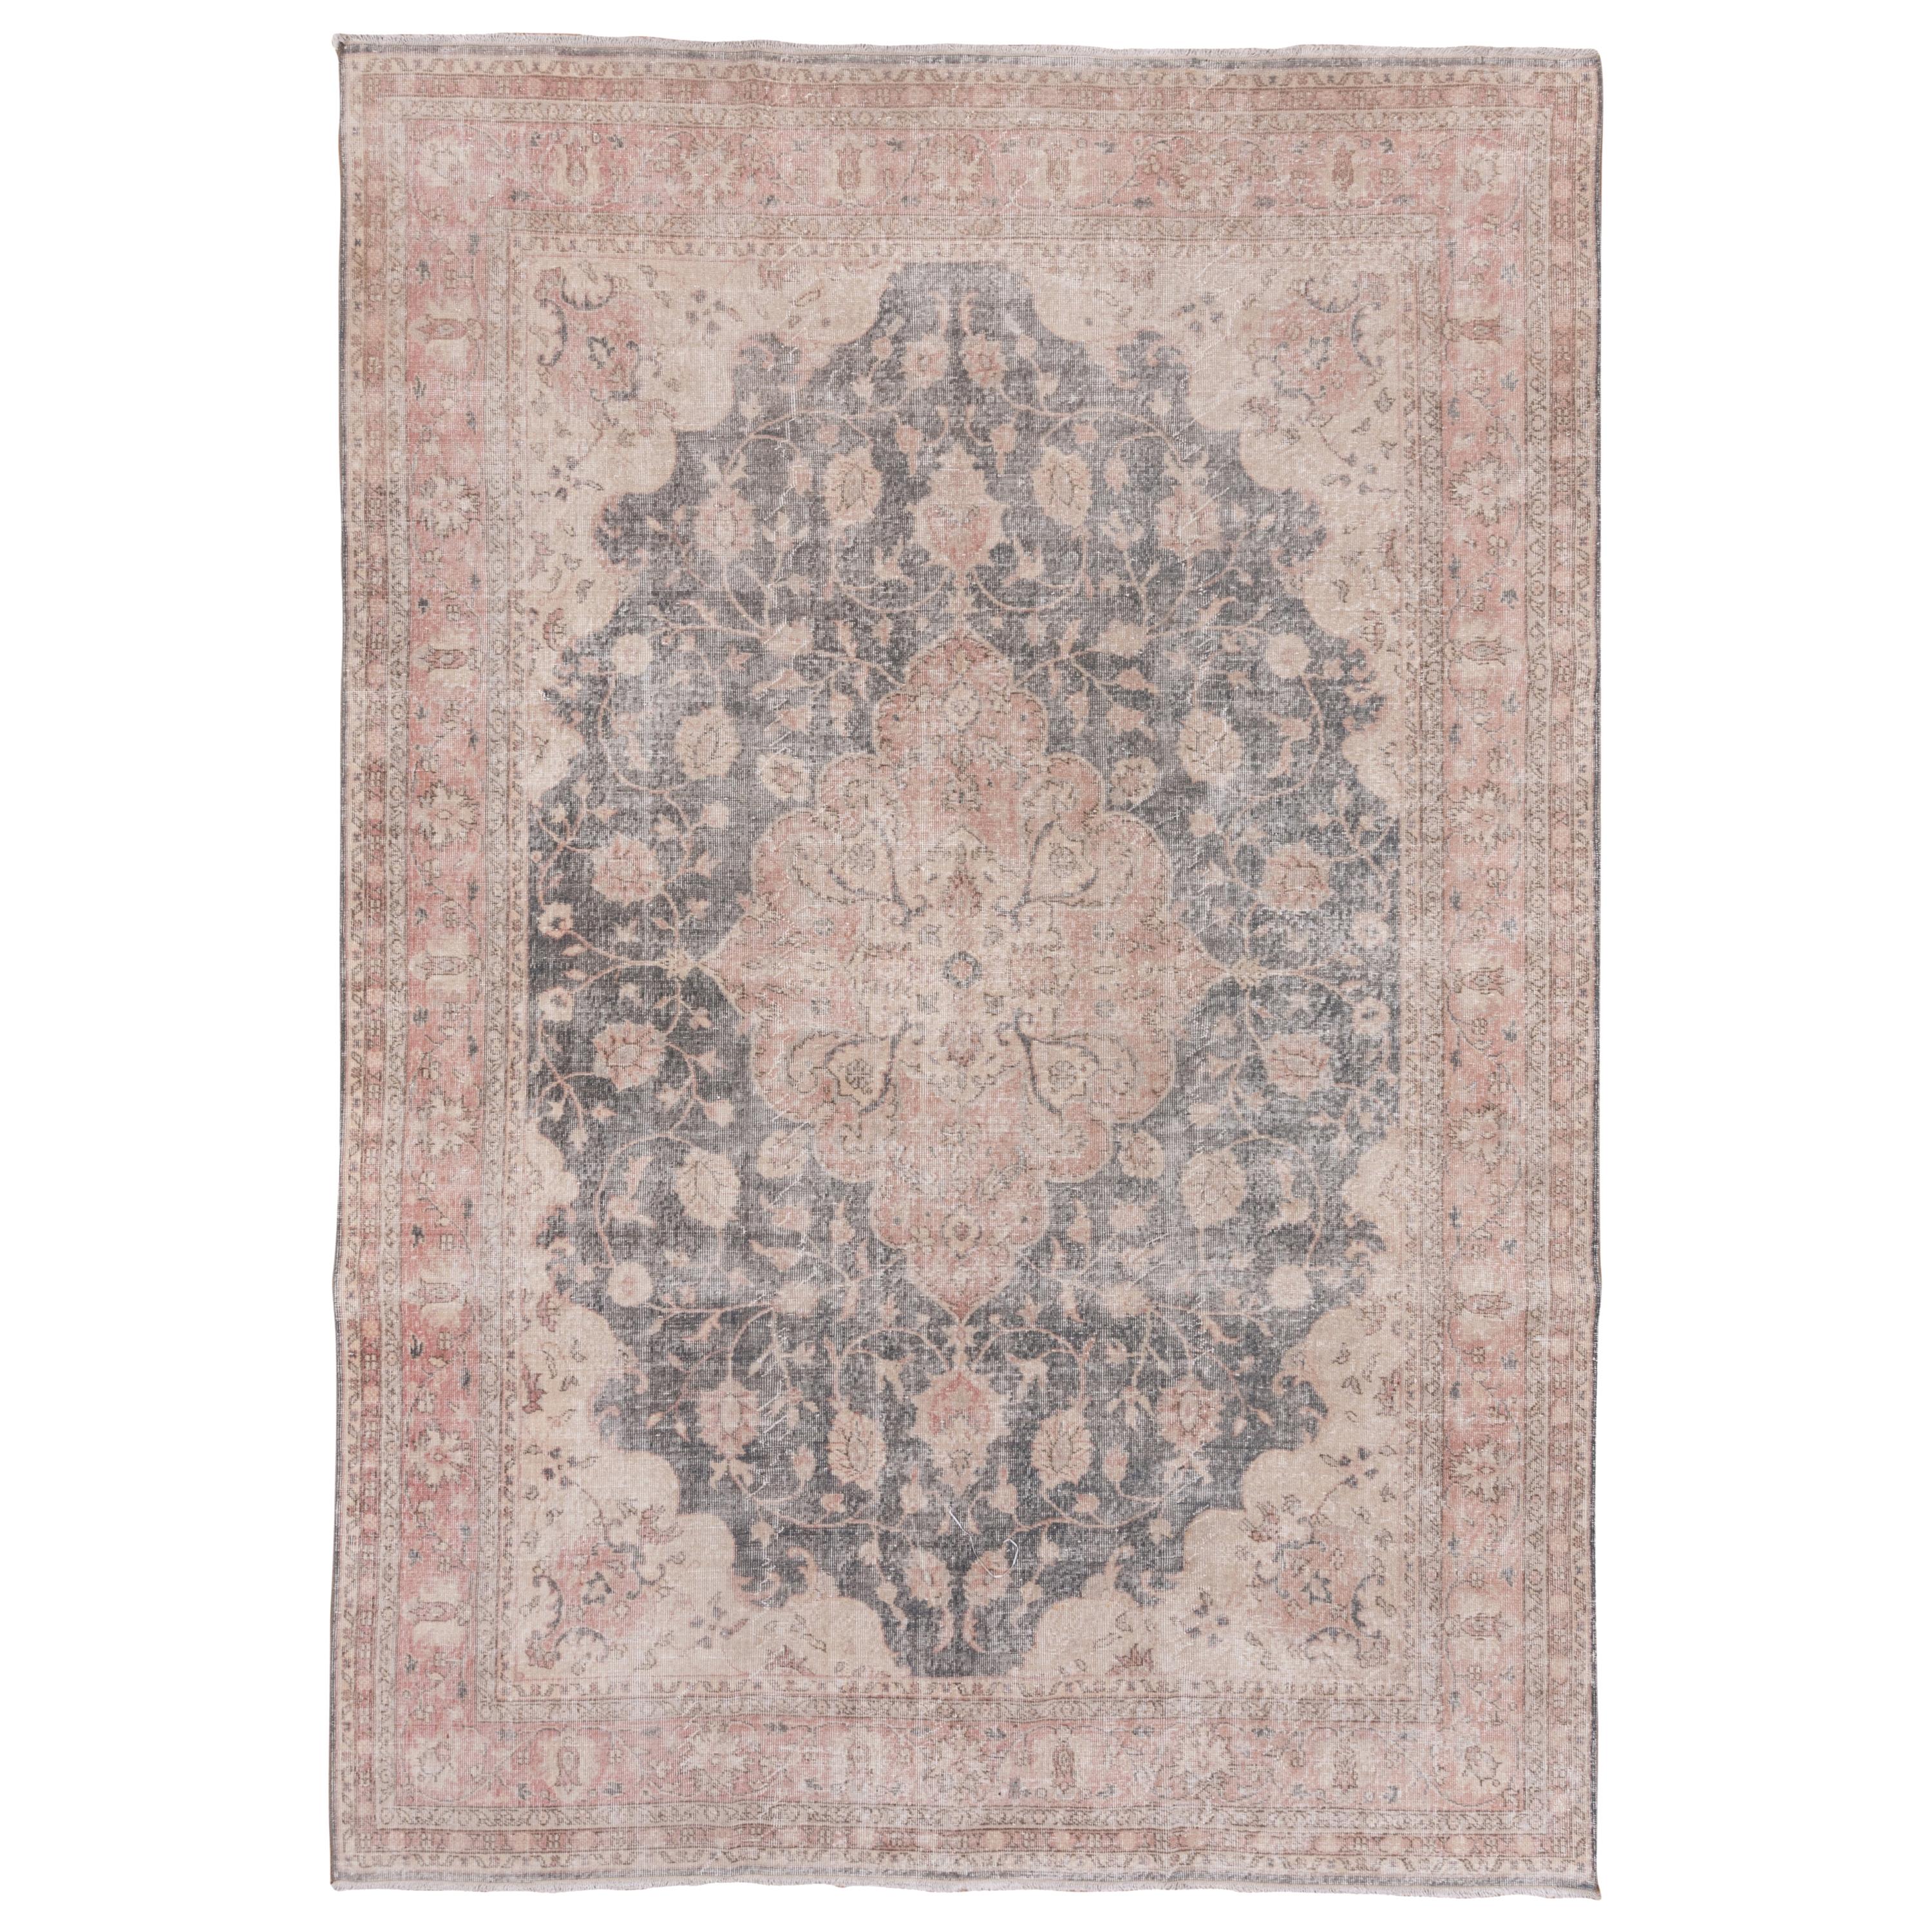 Lightly Distressed Oushak Carpet, Shabby Chic Style, Gray Field, Pink Border